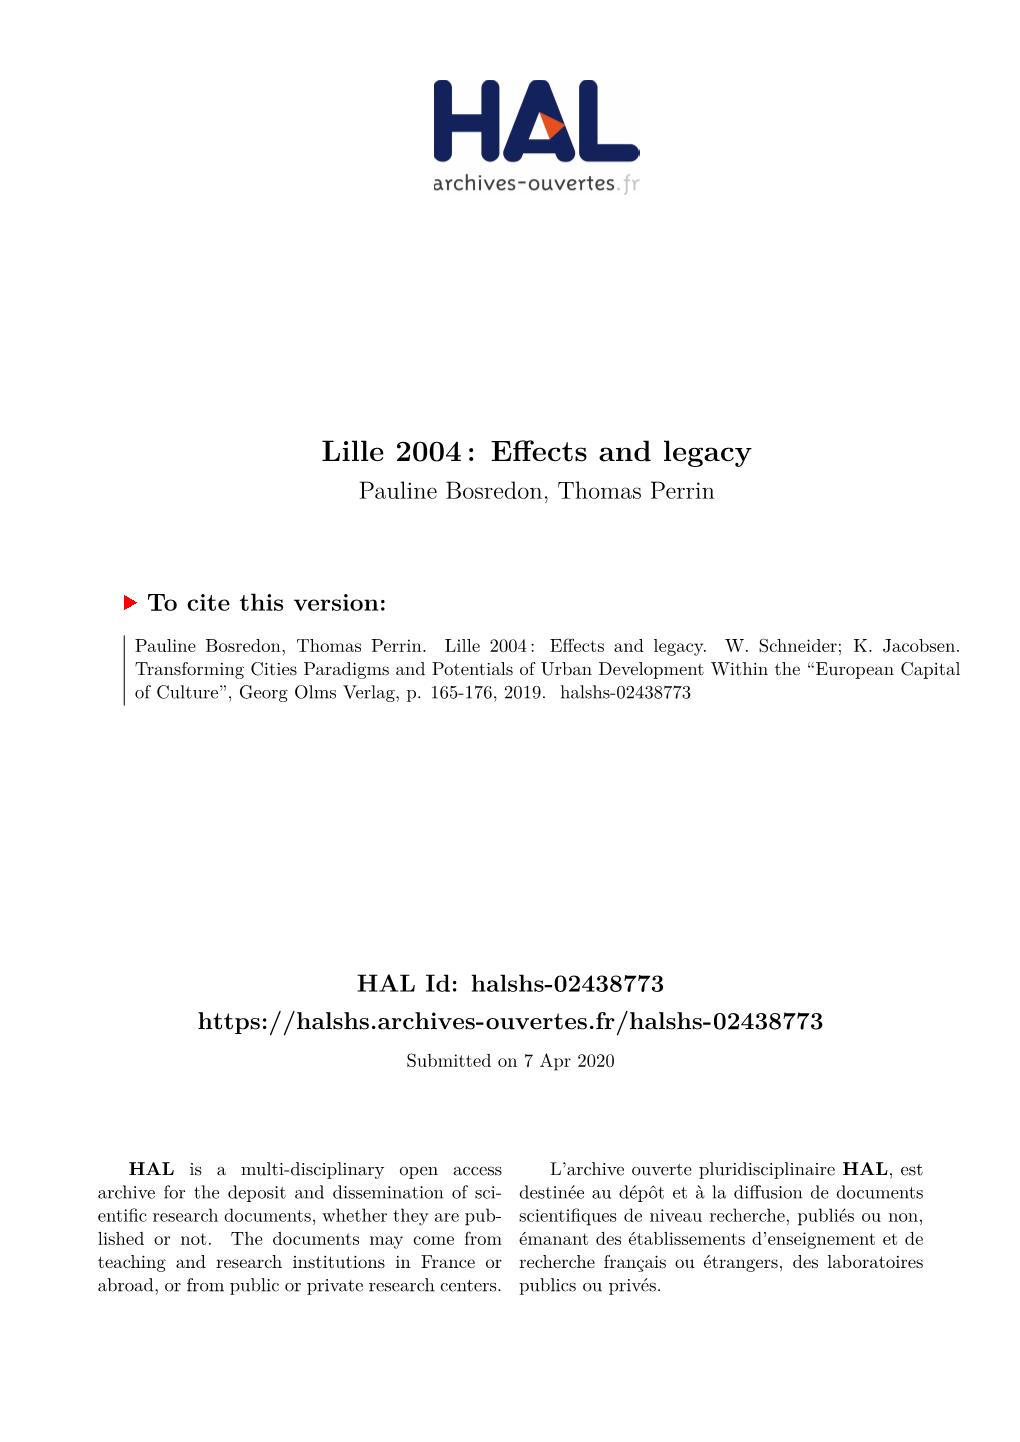 Lille 2004: Effects and Legacy